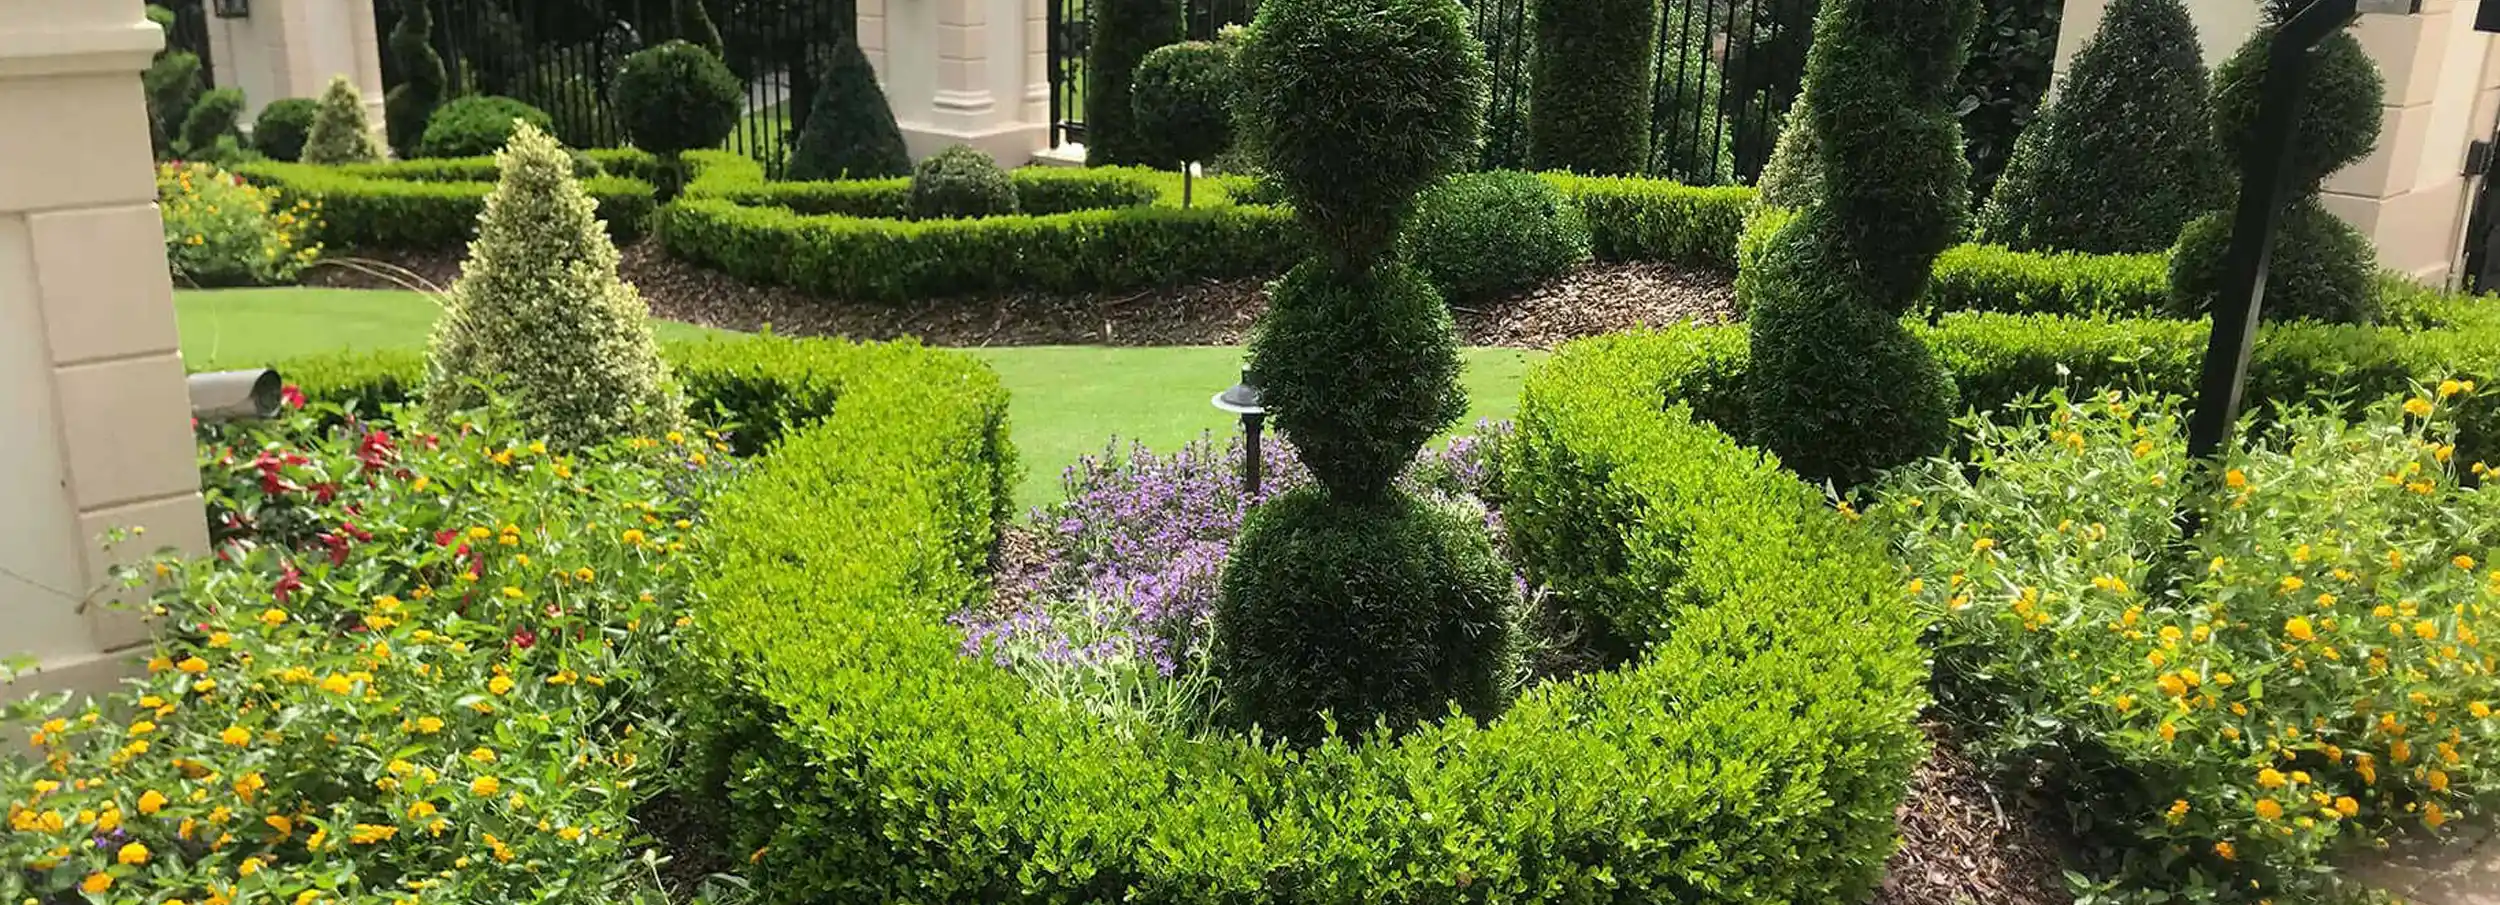 Variety of topiary bushes in front yard.